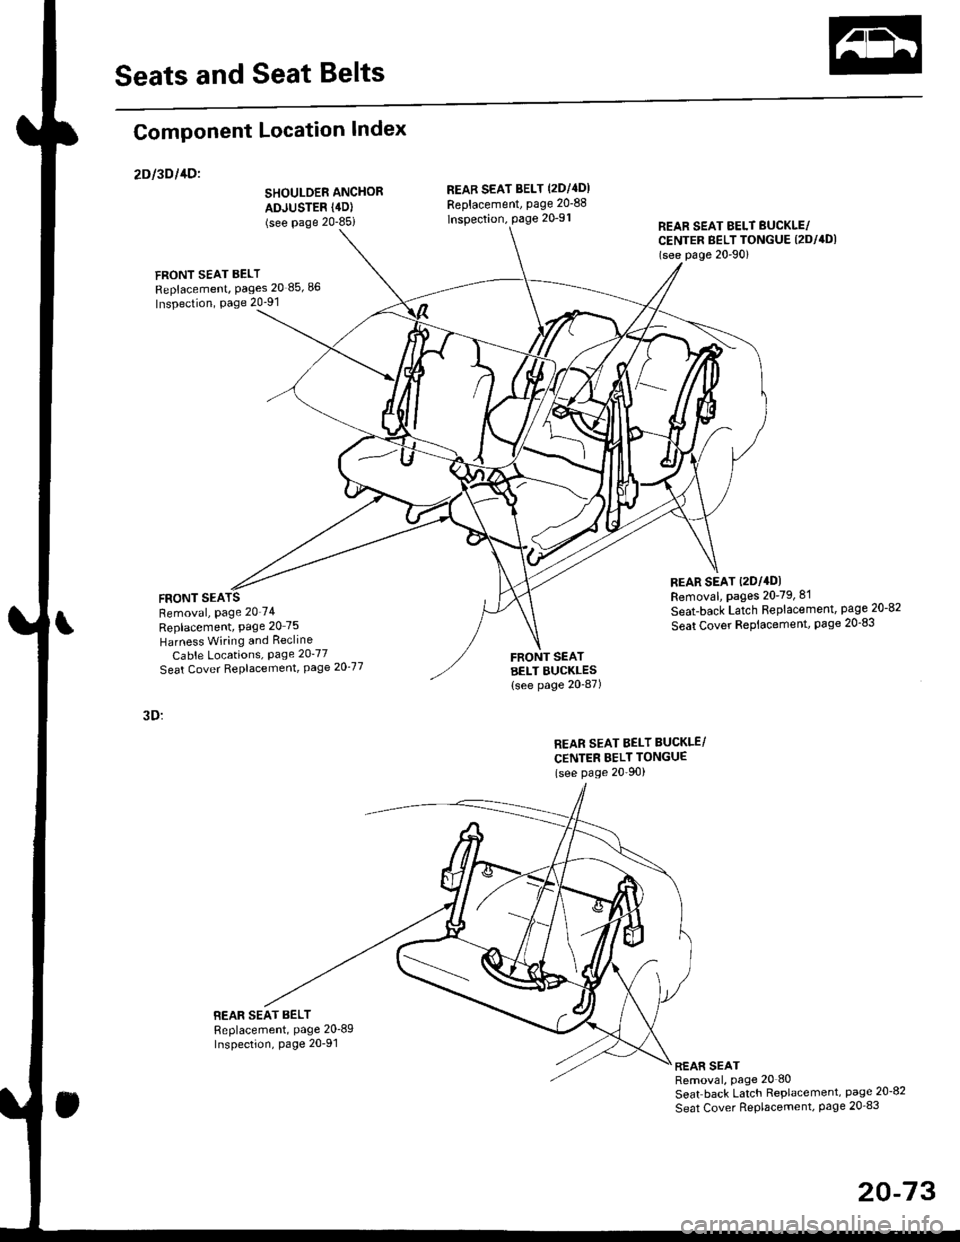 HONDA CIVIC 1997 6.G Workshop Manual Seats and Seat Belts
Component Location Index
2Dl3Dl1Dl
SHOULDER ANCHOR
ADJUSTER (4D)
(see Page 20-85i
FRONT SEAT BELT
Replacement, Pages 20 85,86
Inspection, Page 20-91
FRONT SEARemoval, Page 2074
R